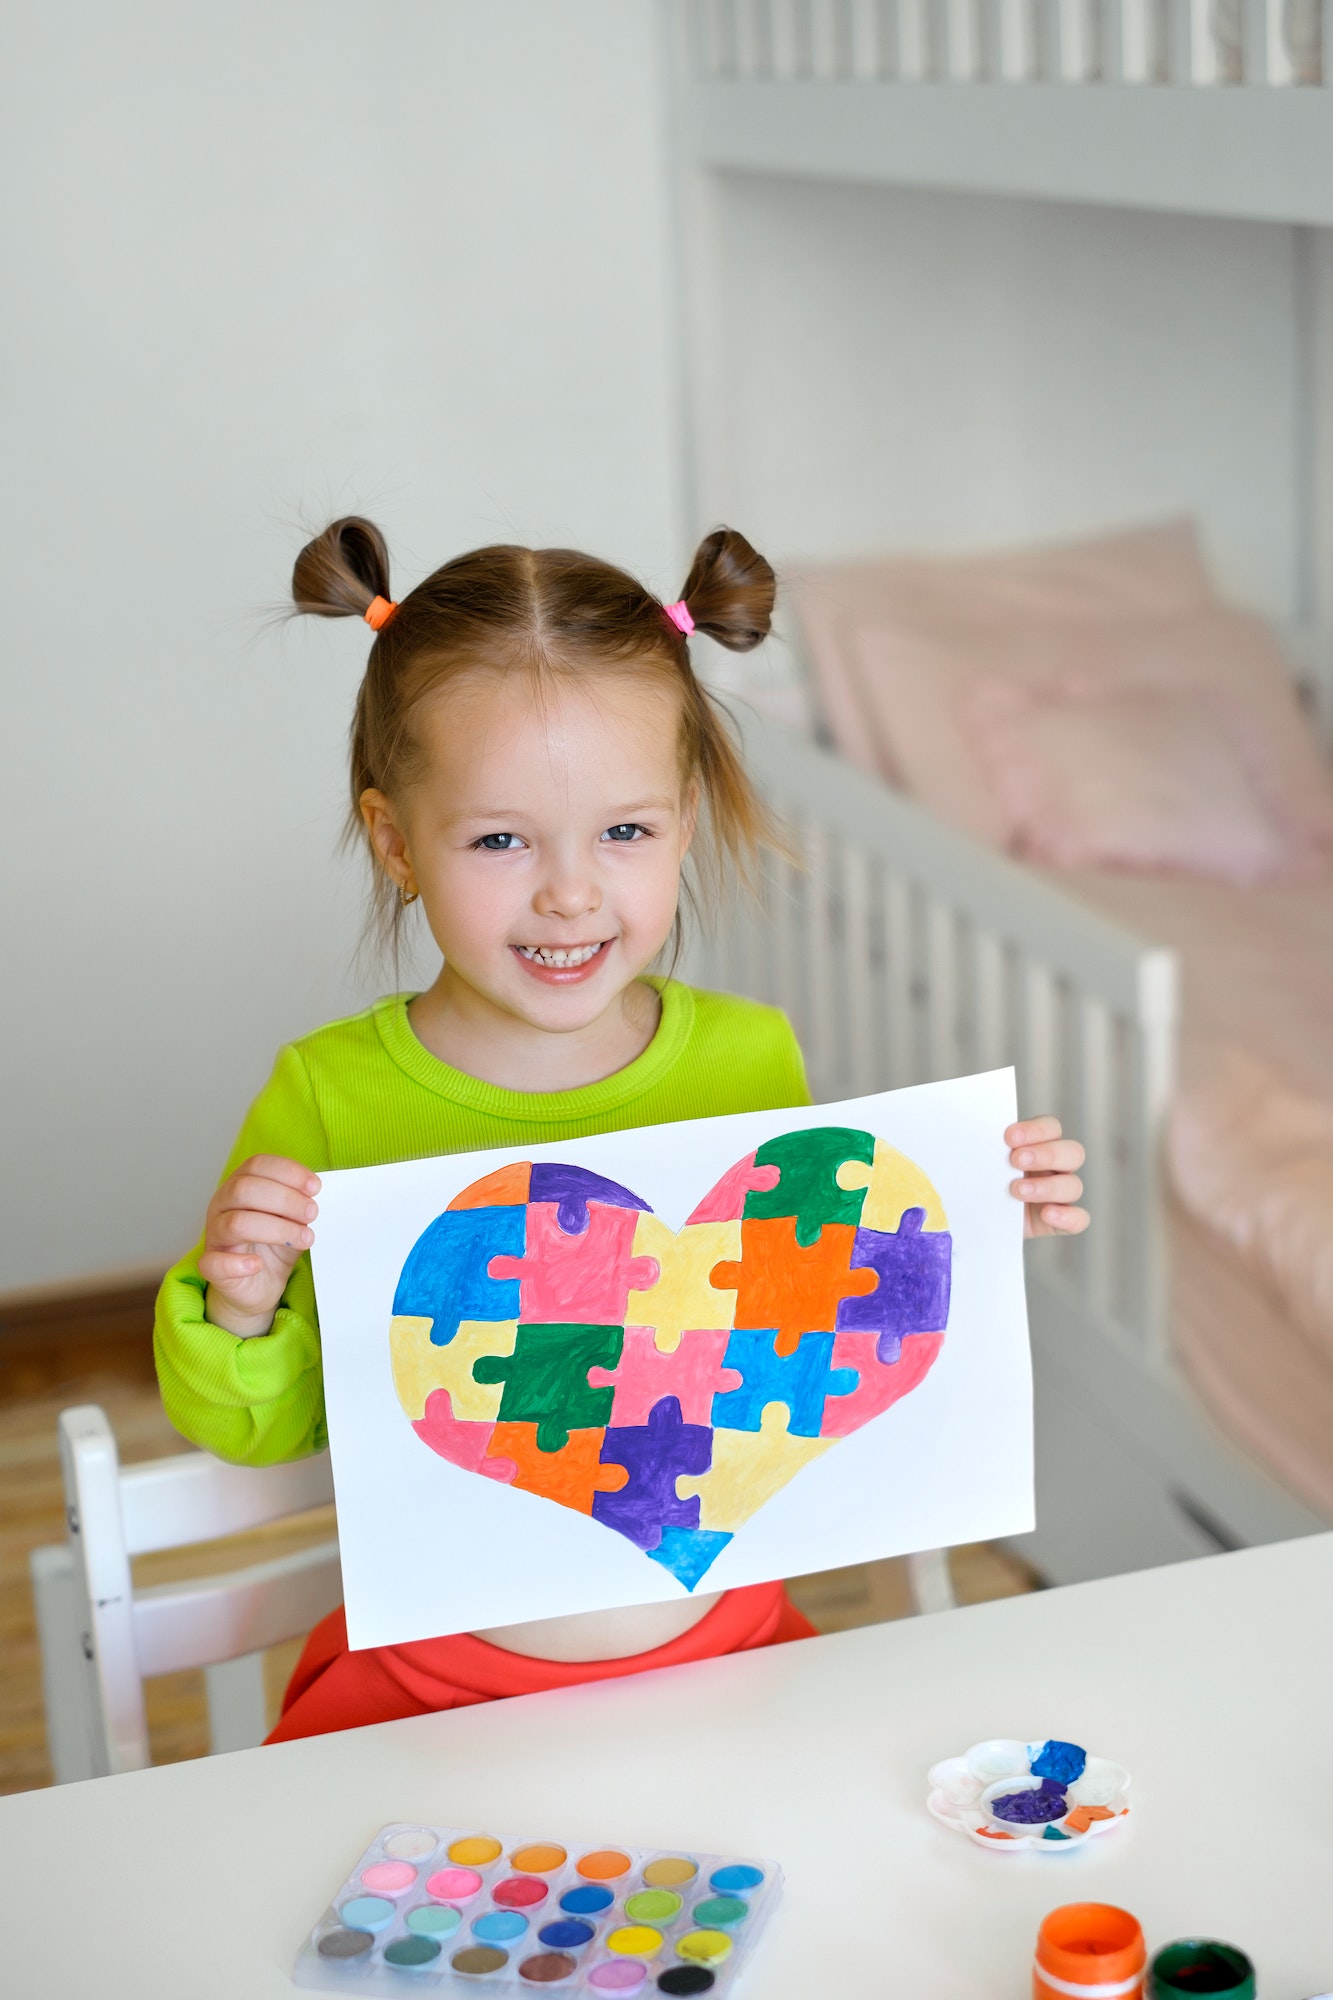 Kid drew a picture of a heart as a gift to a friend suffering from autism